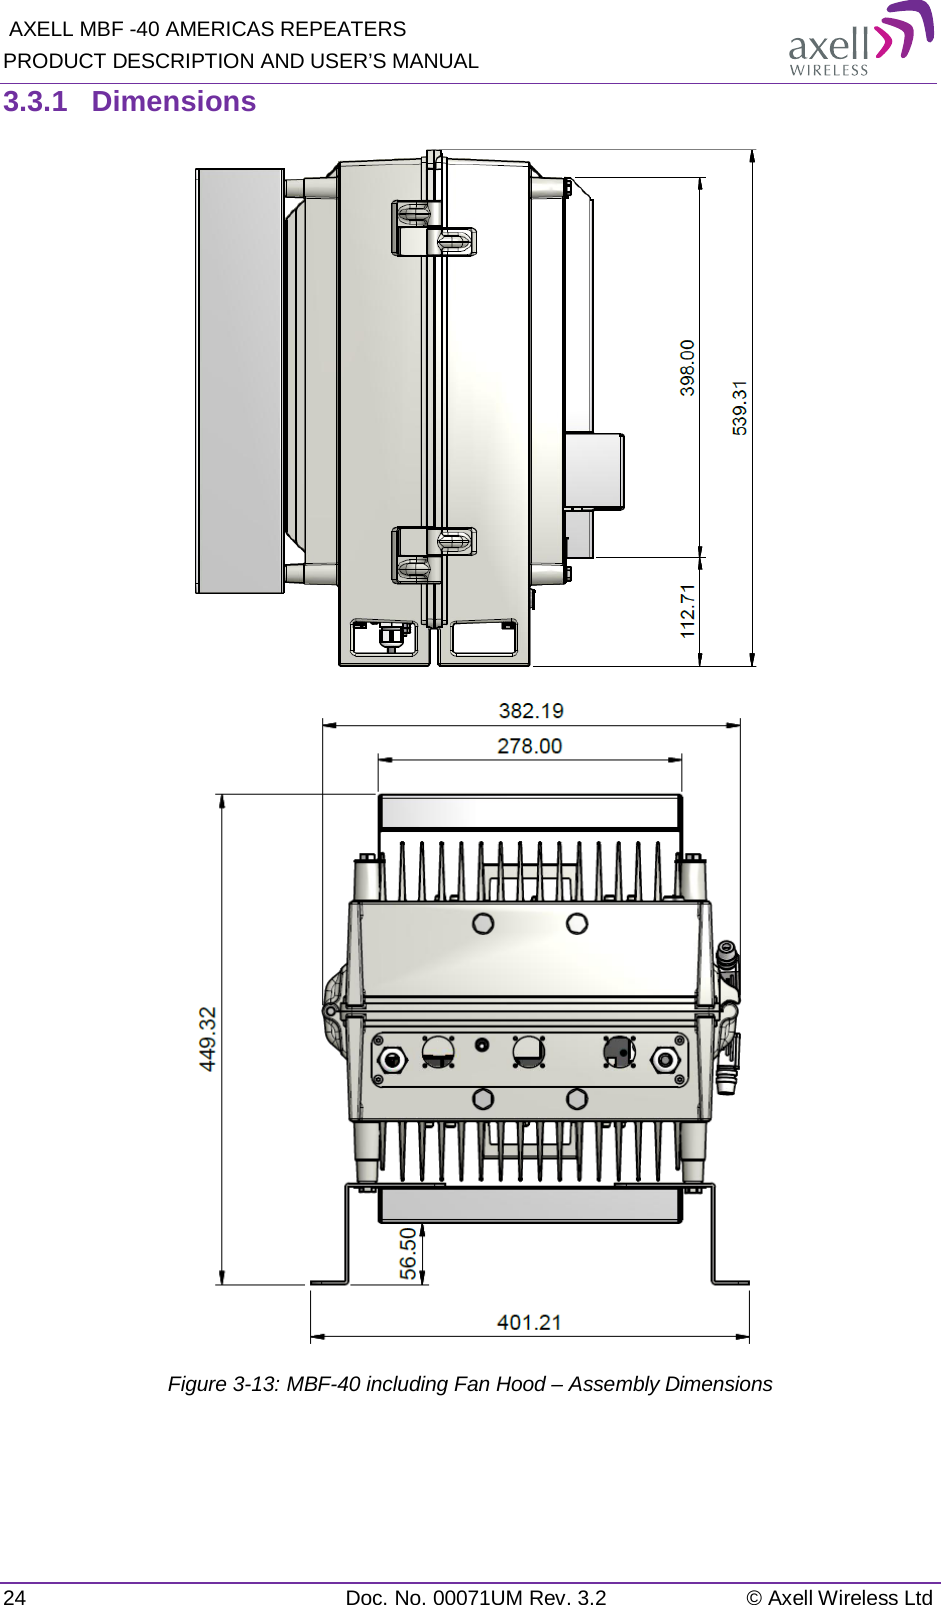  AXELL MBF -40 AMERICAS REPEATERS PRODUCT DESCRIPTION AND USER’S MANUAL 24 Doc. No. 00071UM Rev. 3.2 © Axell Wireless Ltd 3.3.1  Dimensions   Figure  3-13: MBF-40 including Fan Hood – Assembly Dimensions   